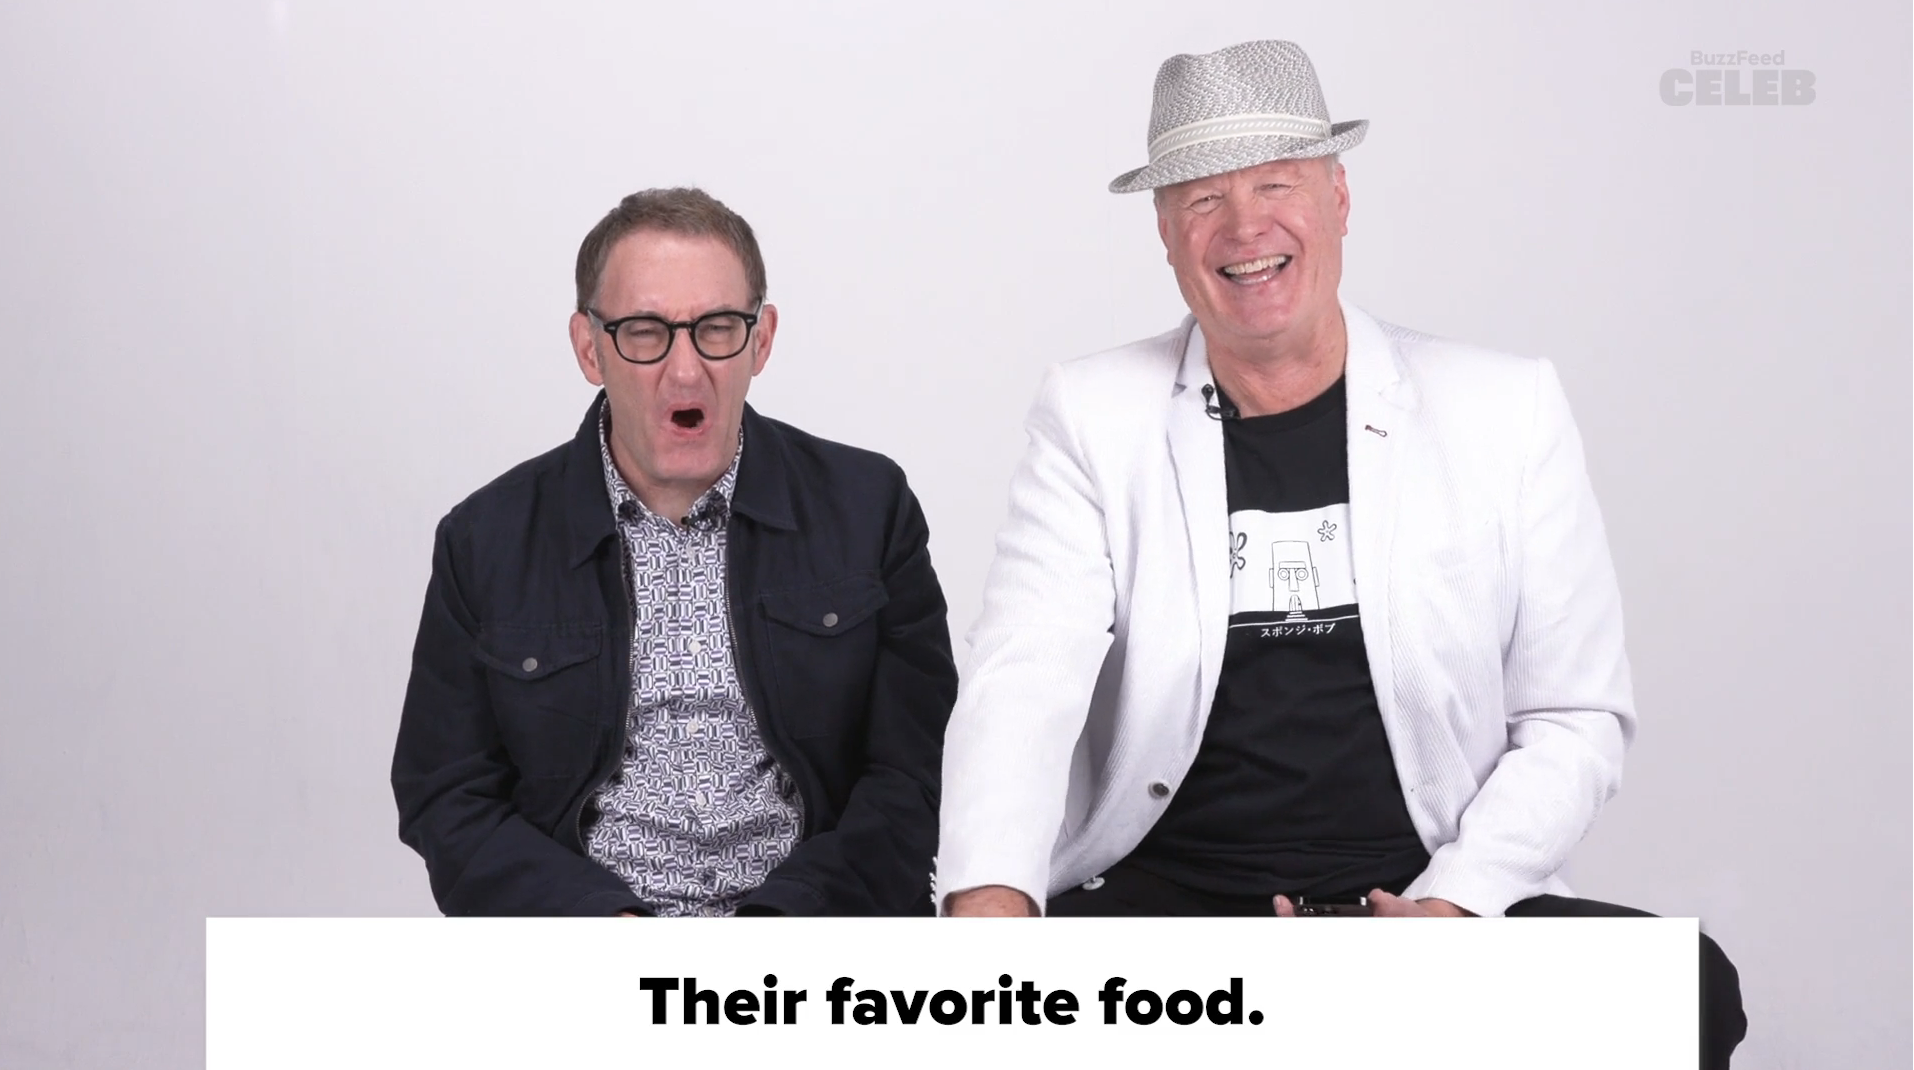 Paul Reubens in a dark jacket and Mark Boone Junior in a white jacket and fedora, sitting next to each other, above the text &quot;Their favorite food.&quot;